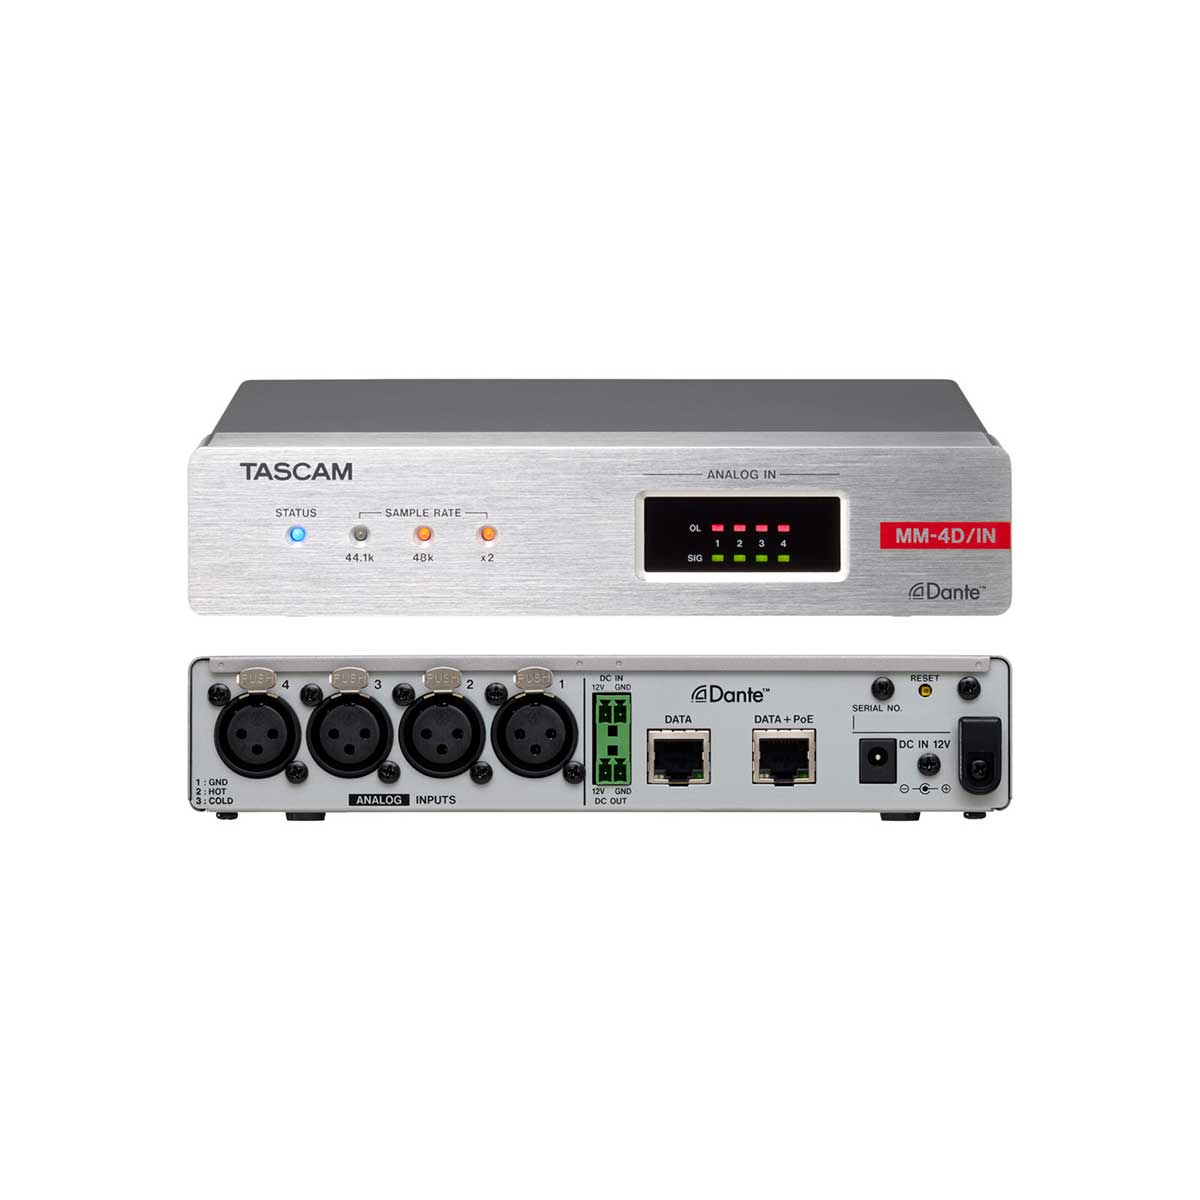 TASCAM MM-4D/IN-X 4-Channel Mic / Line Input Dante Converter with built-in DSP Mixer